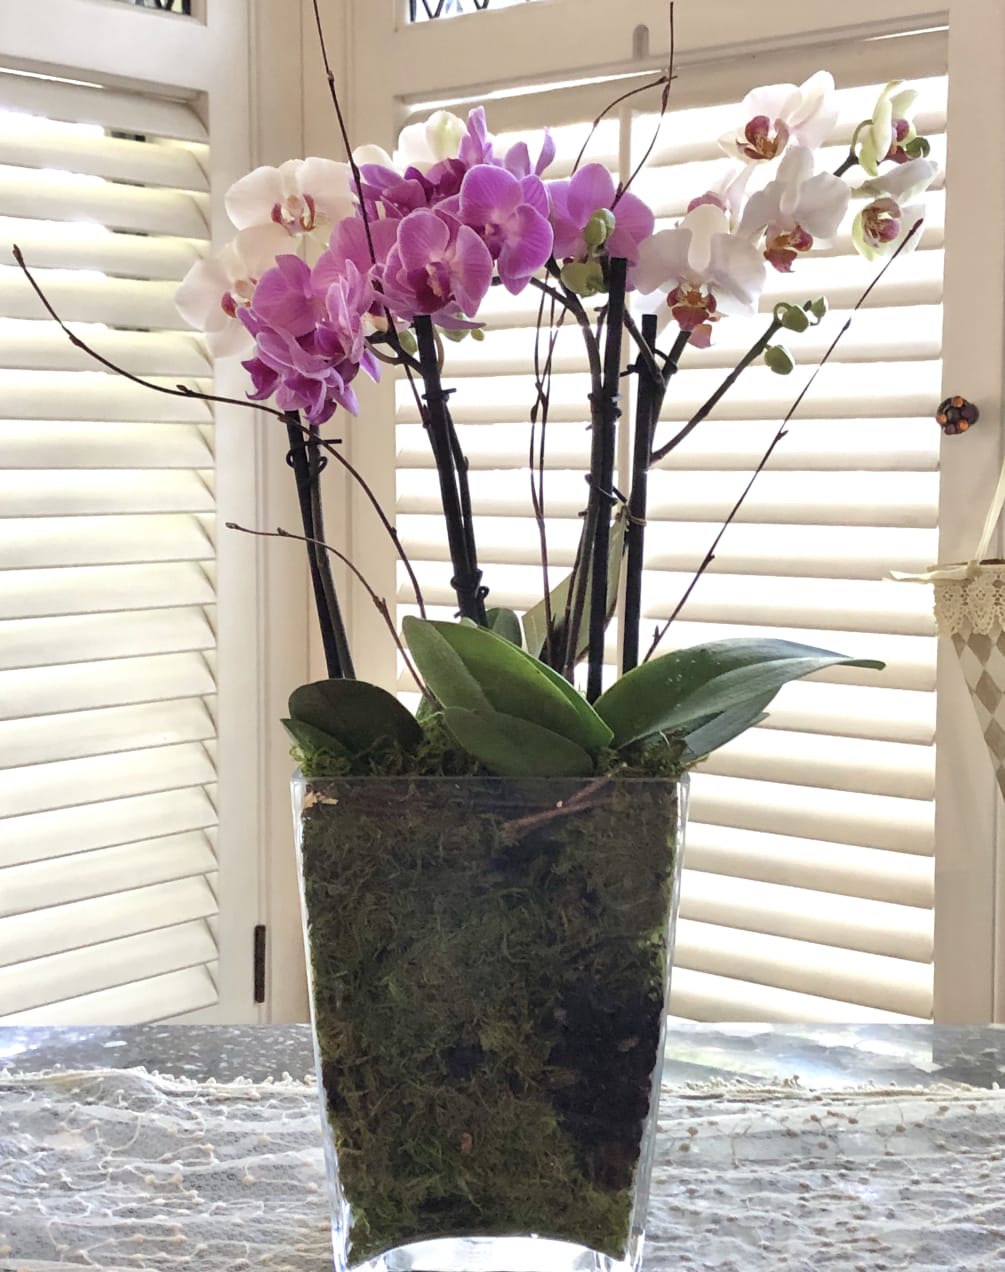 These 3-4 beautiful petite Phalaenopsis orchids are planted together in an elegant